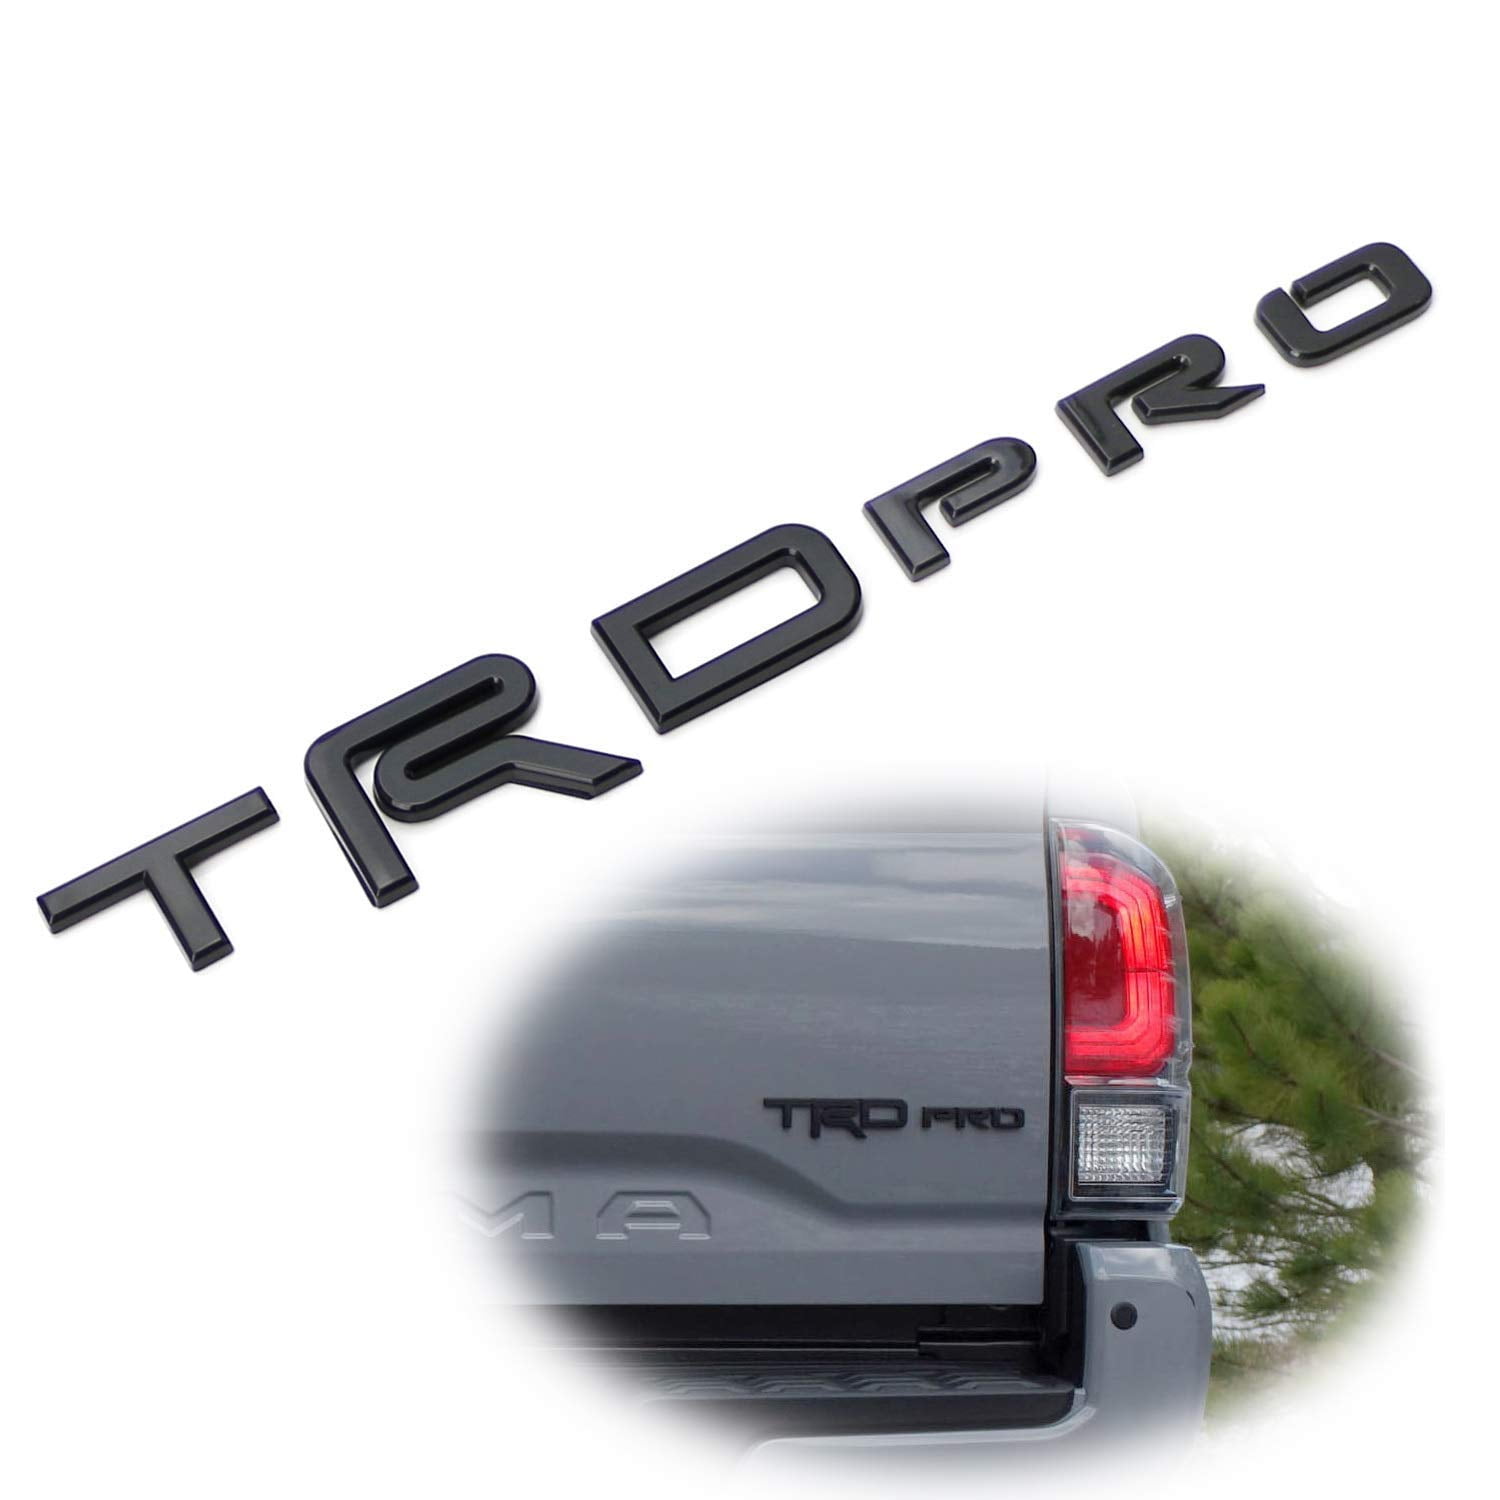 Fit Trd Pro 3D Emblem Sticker Decor Badge For Toyota Tacoma Tundra Side Door Trunk Tail Black Red